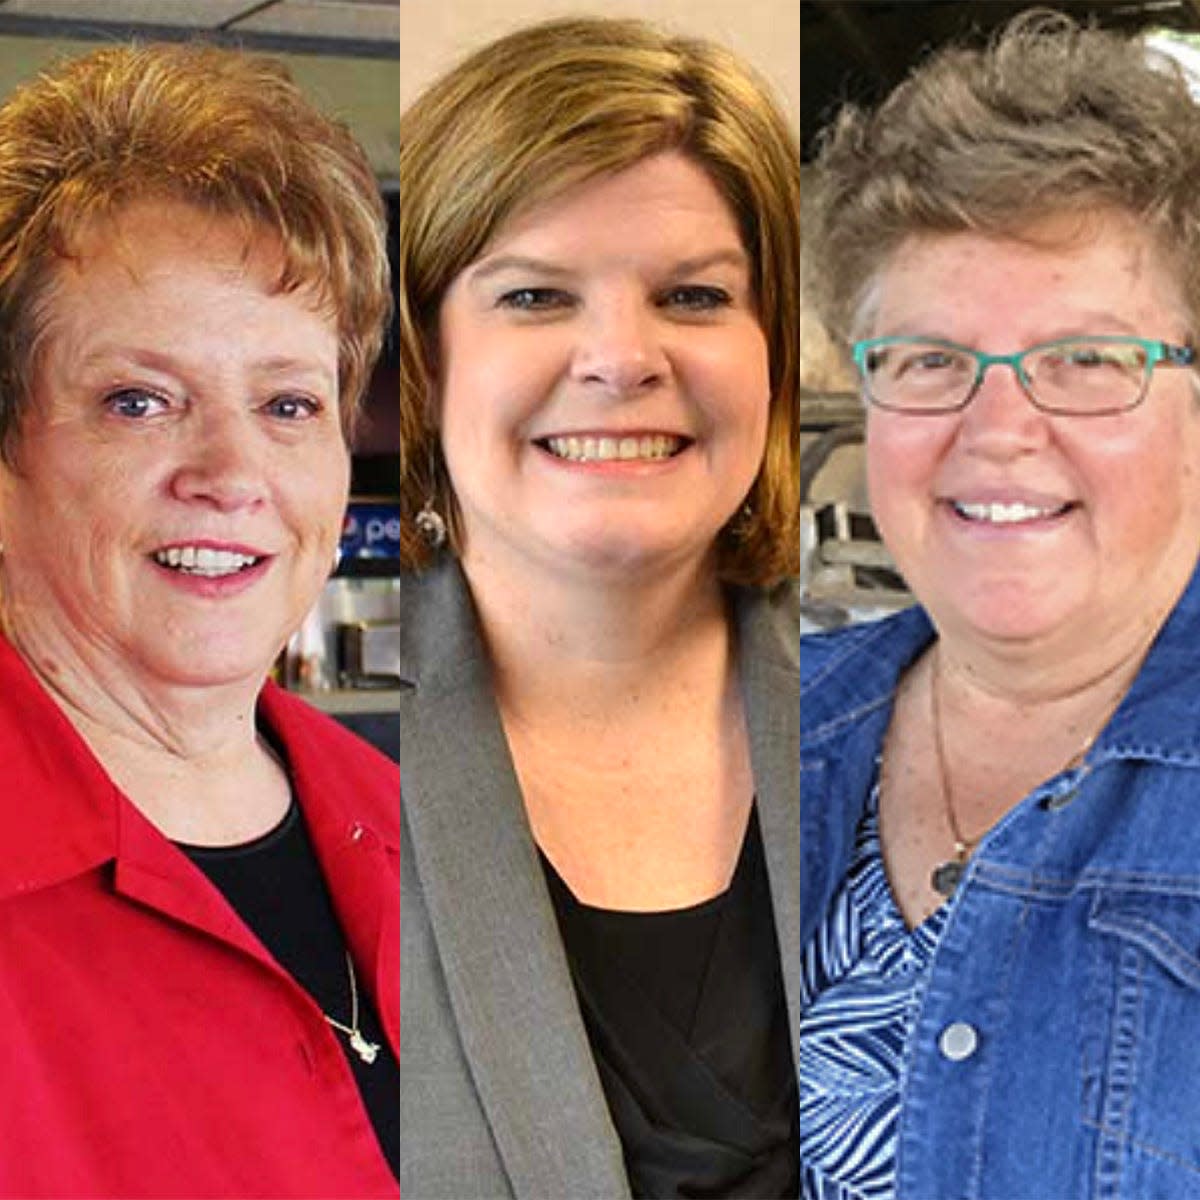 Mary Williams, Kelly Tourdot and Becky Levzow, former members of the  Wisconsin Technical College System Board, have stepped down, nearly two years after their terms ended.